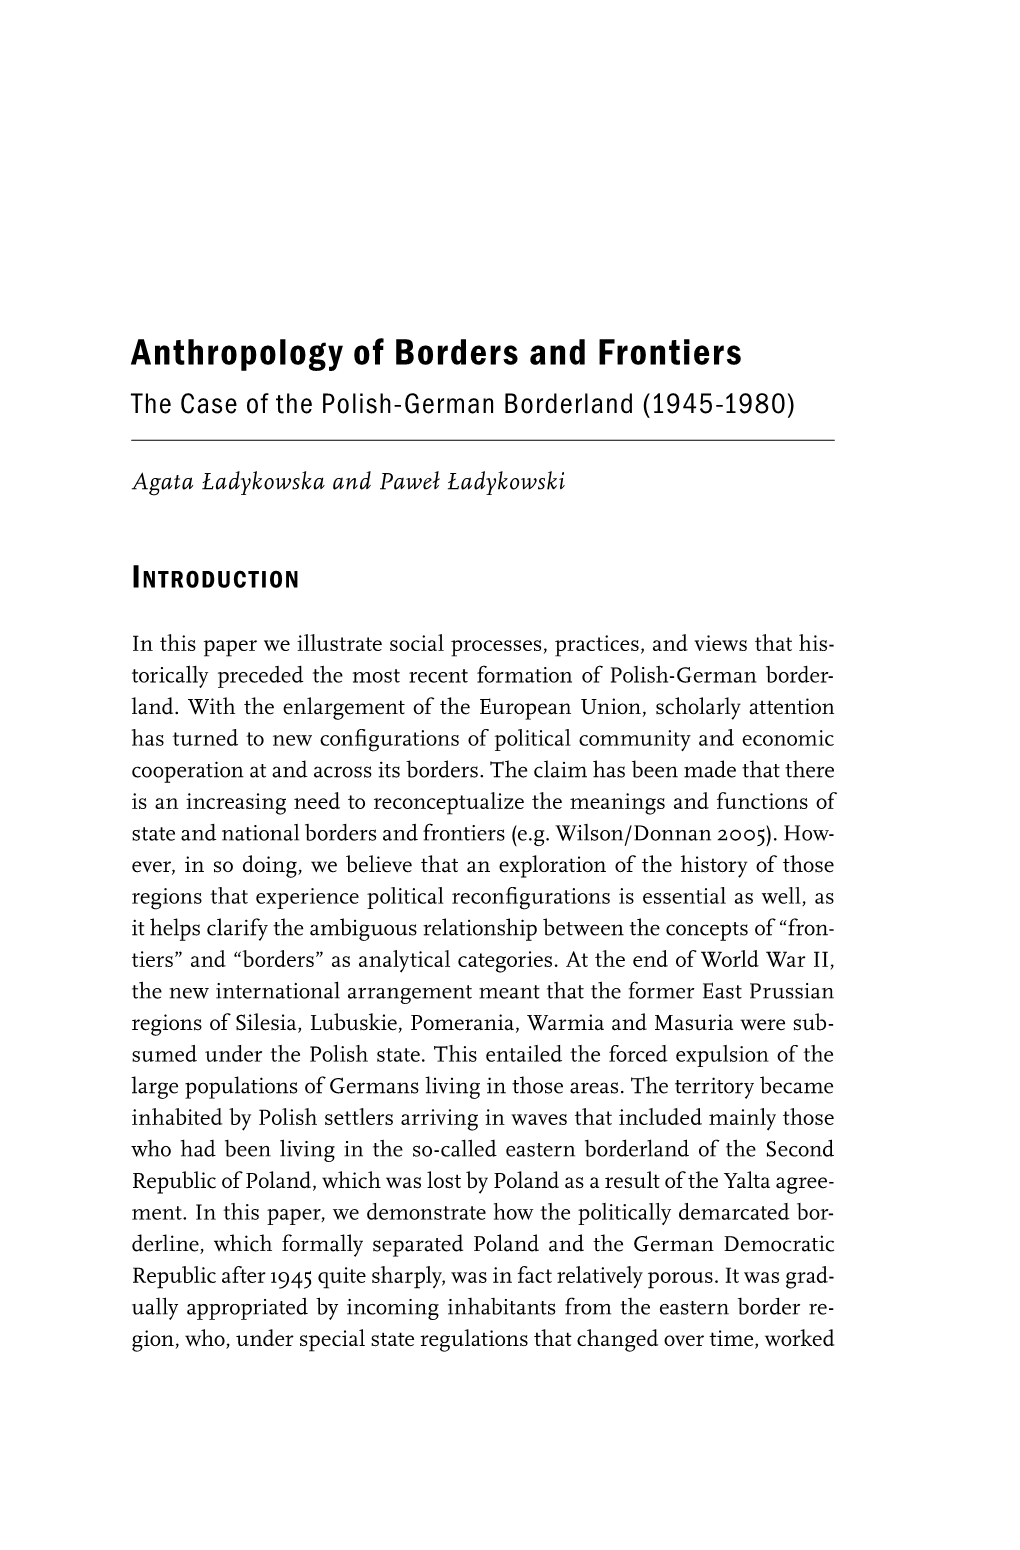 Anthropology of Borders and Frontiers the Case of the Polish-German Borderland (1945-1980)